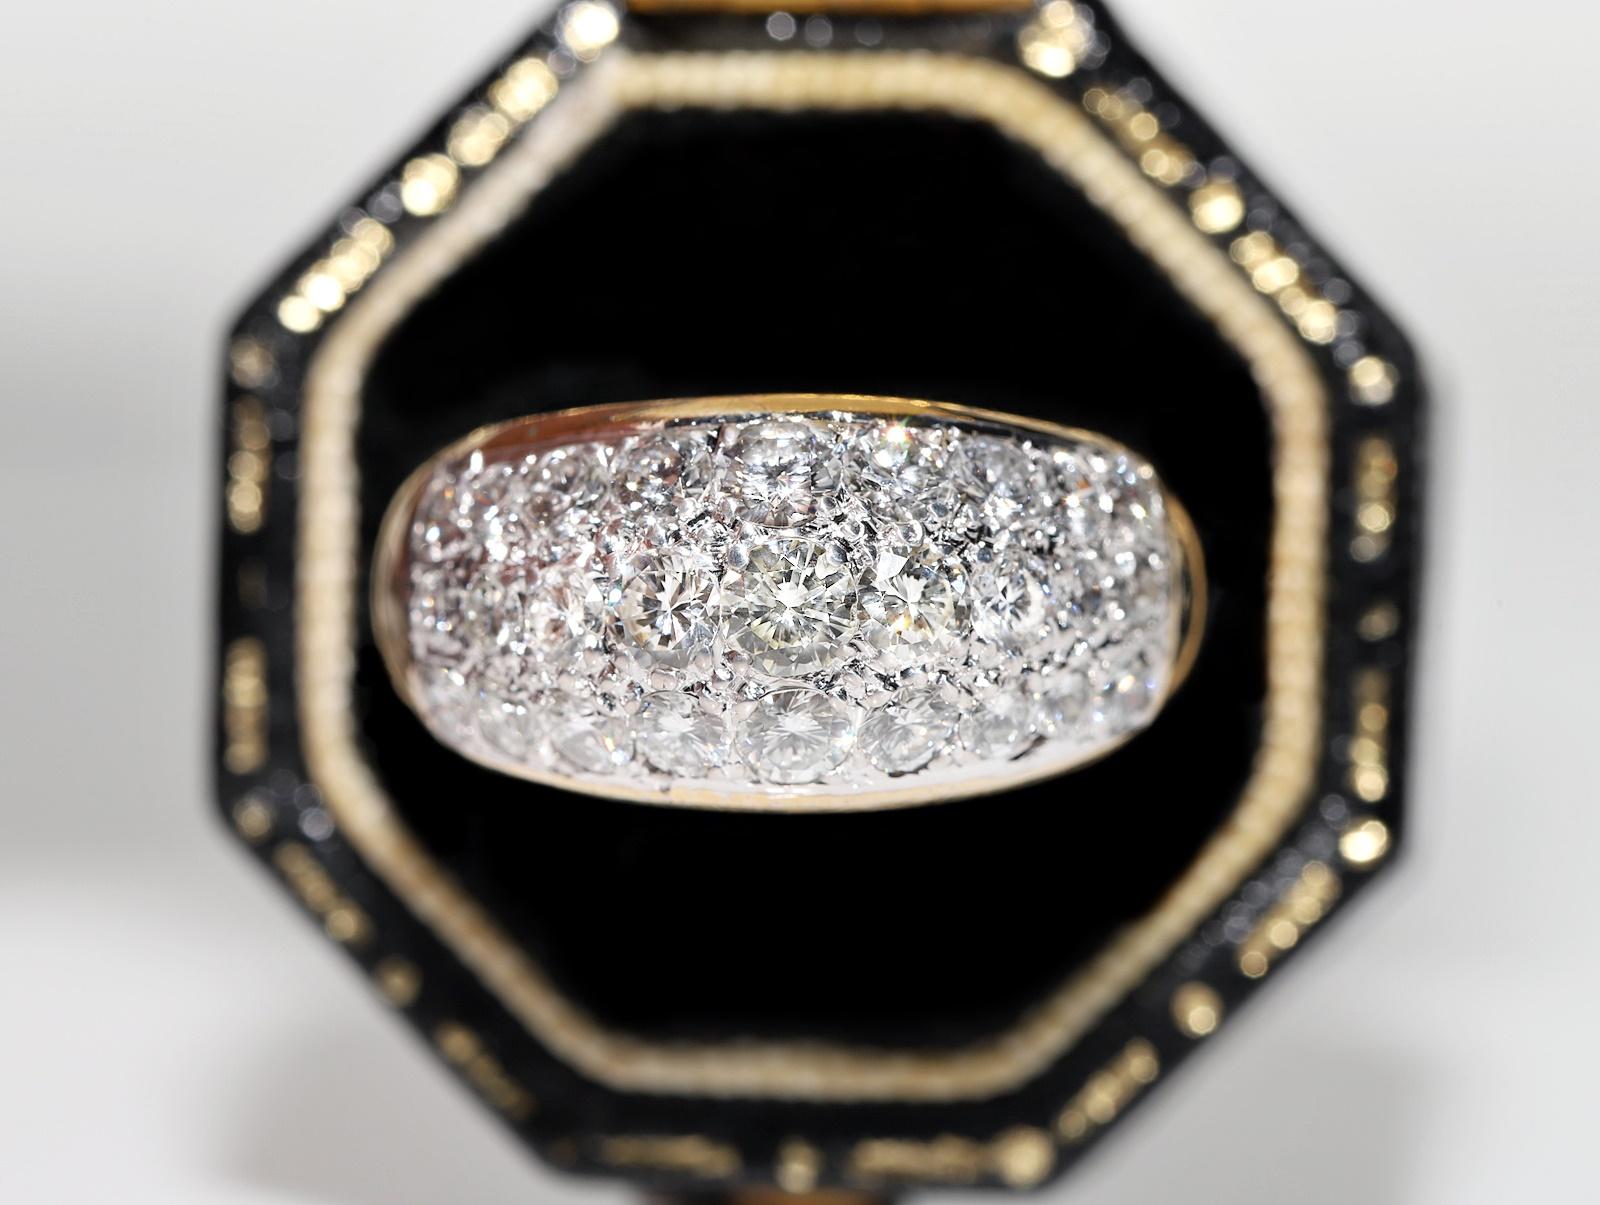 In very good condition.
Total weight is 7.4 grams.
Totally is diamond 1.10 ct.
The diamond is has G-H color vvs-vs clarity.
Ring size is US 5.2 (We offer free resizing)
We can make any size.
Box is not included.
Please contact for any questions.